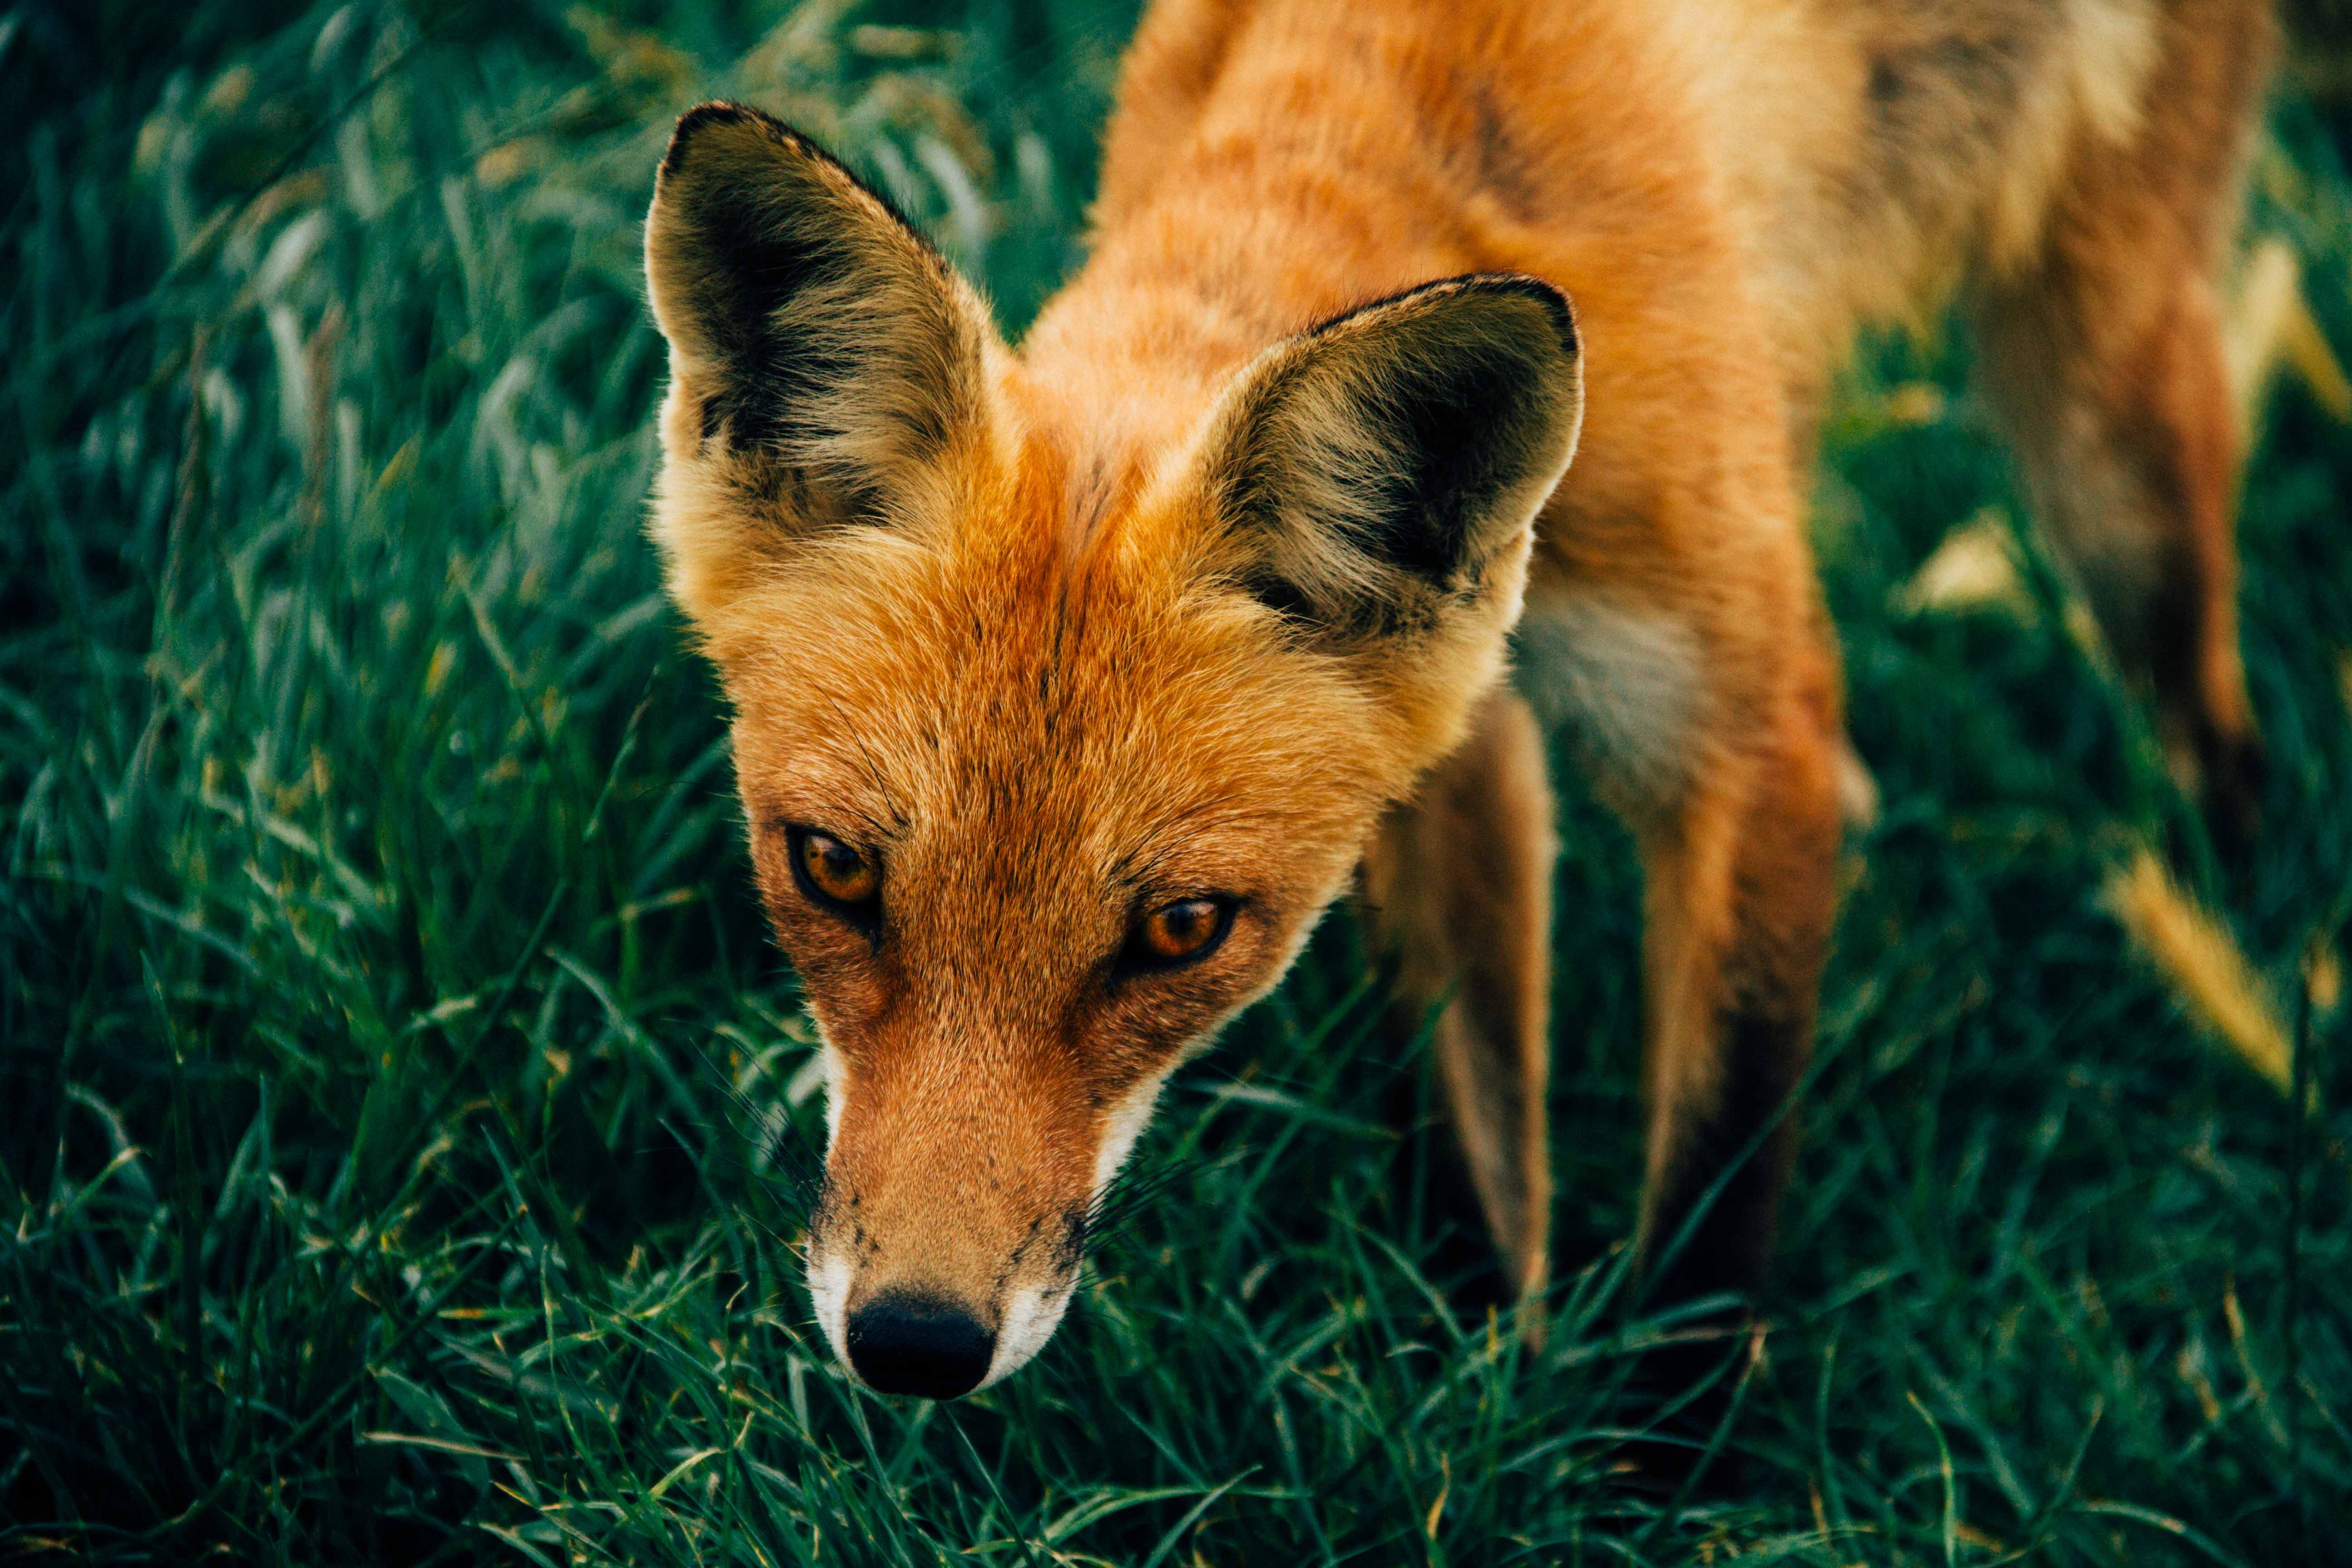 50935 download wallpaper fox, animals, grass, muzzle screensavers and pictures for free